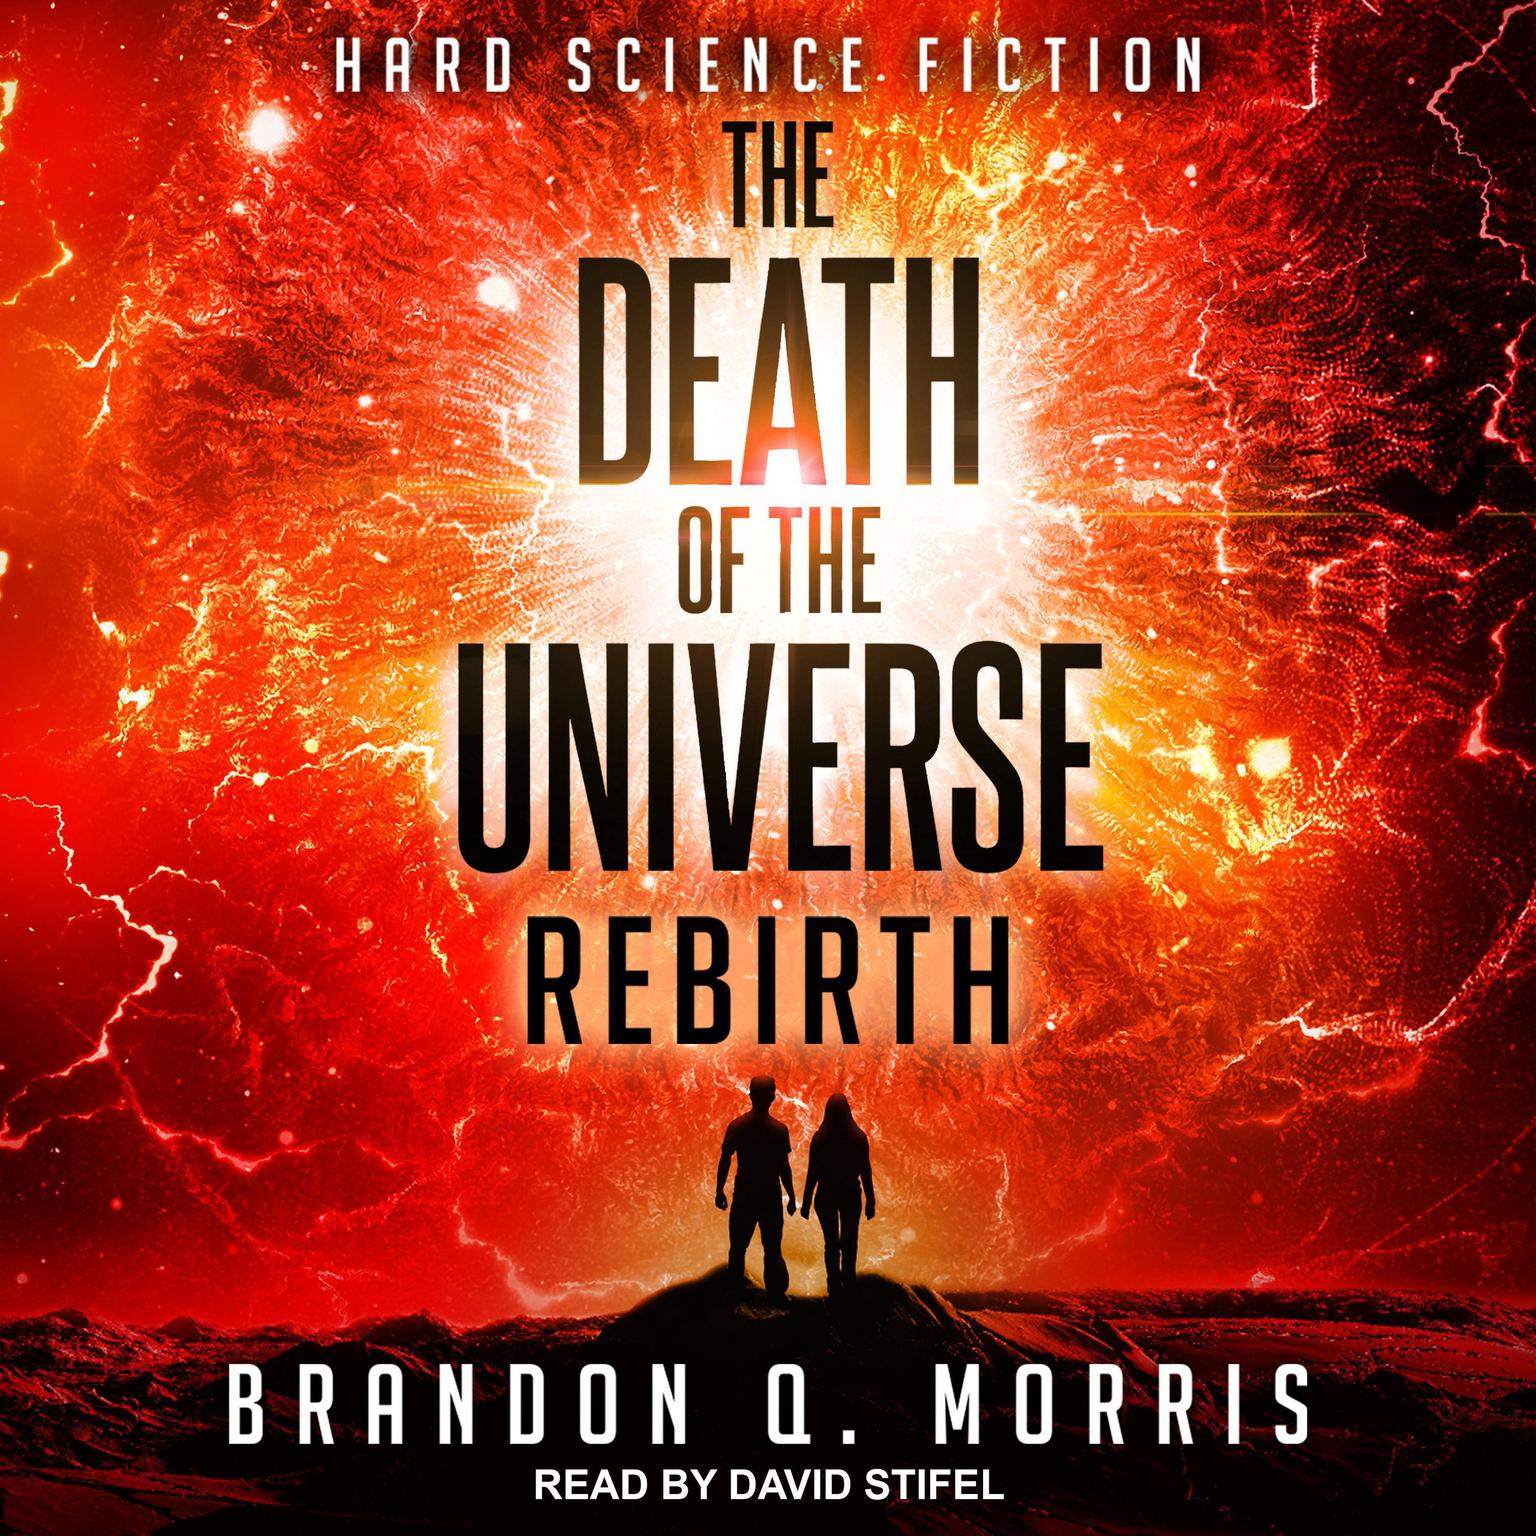 The Death of the Universe: Rebirth Audiobook, by Brandon Q. Morris